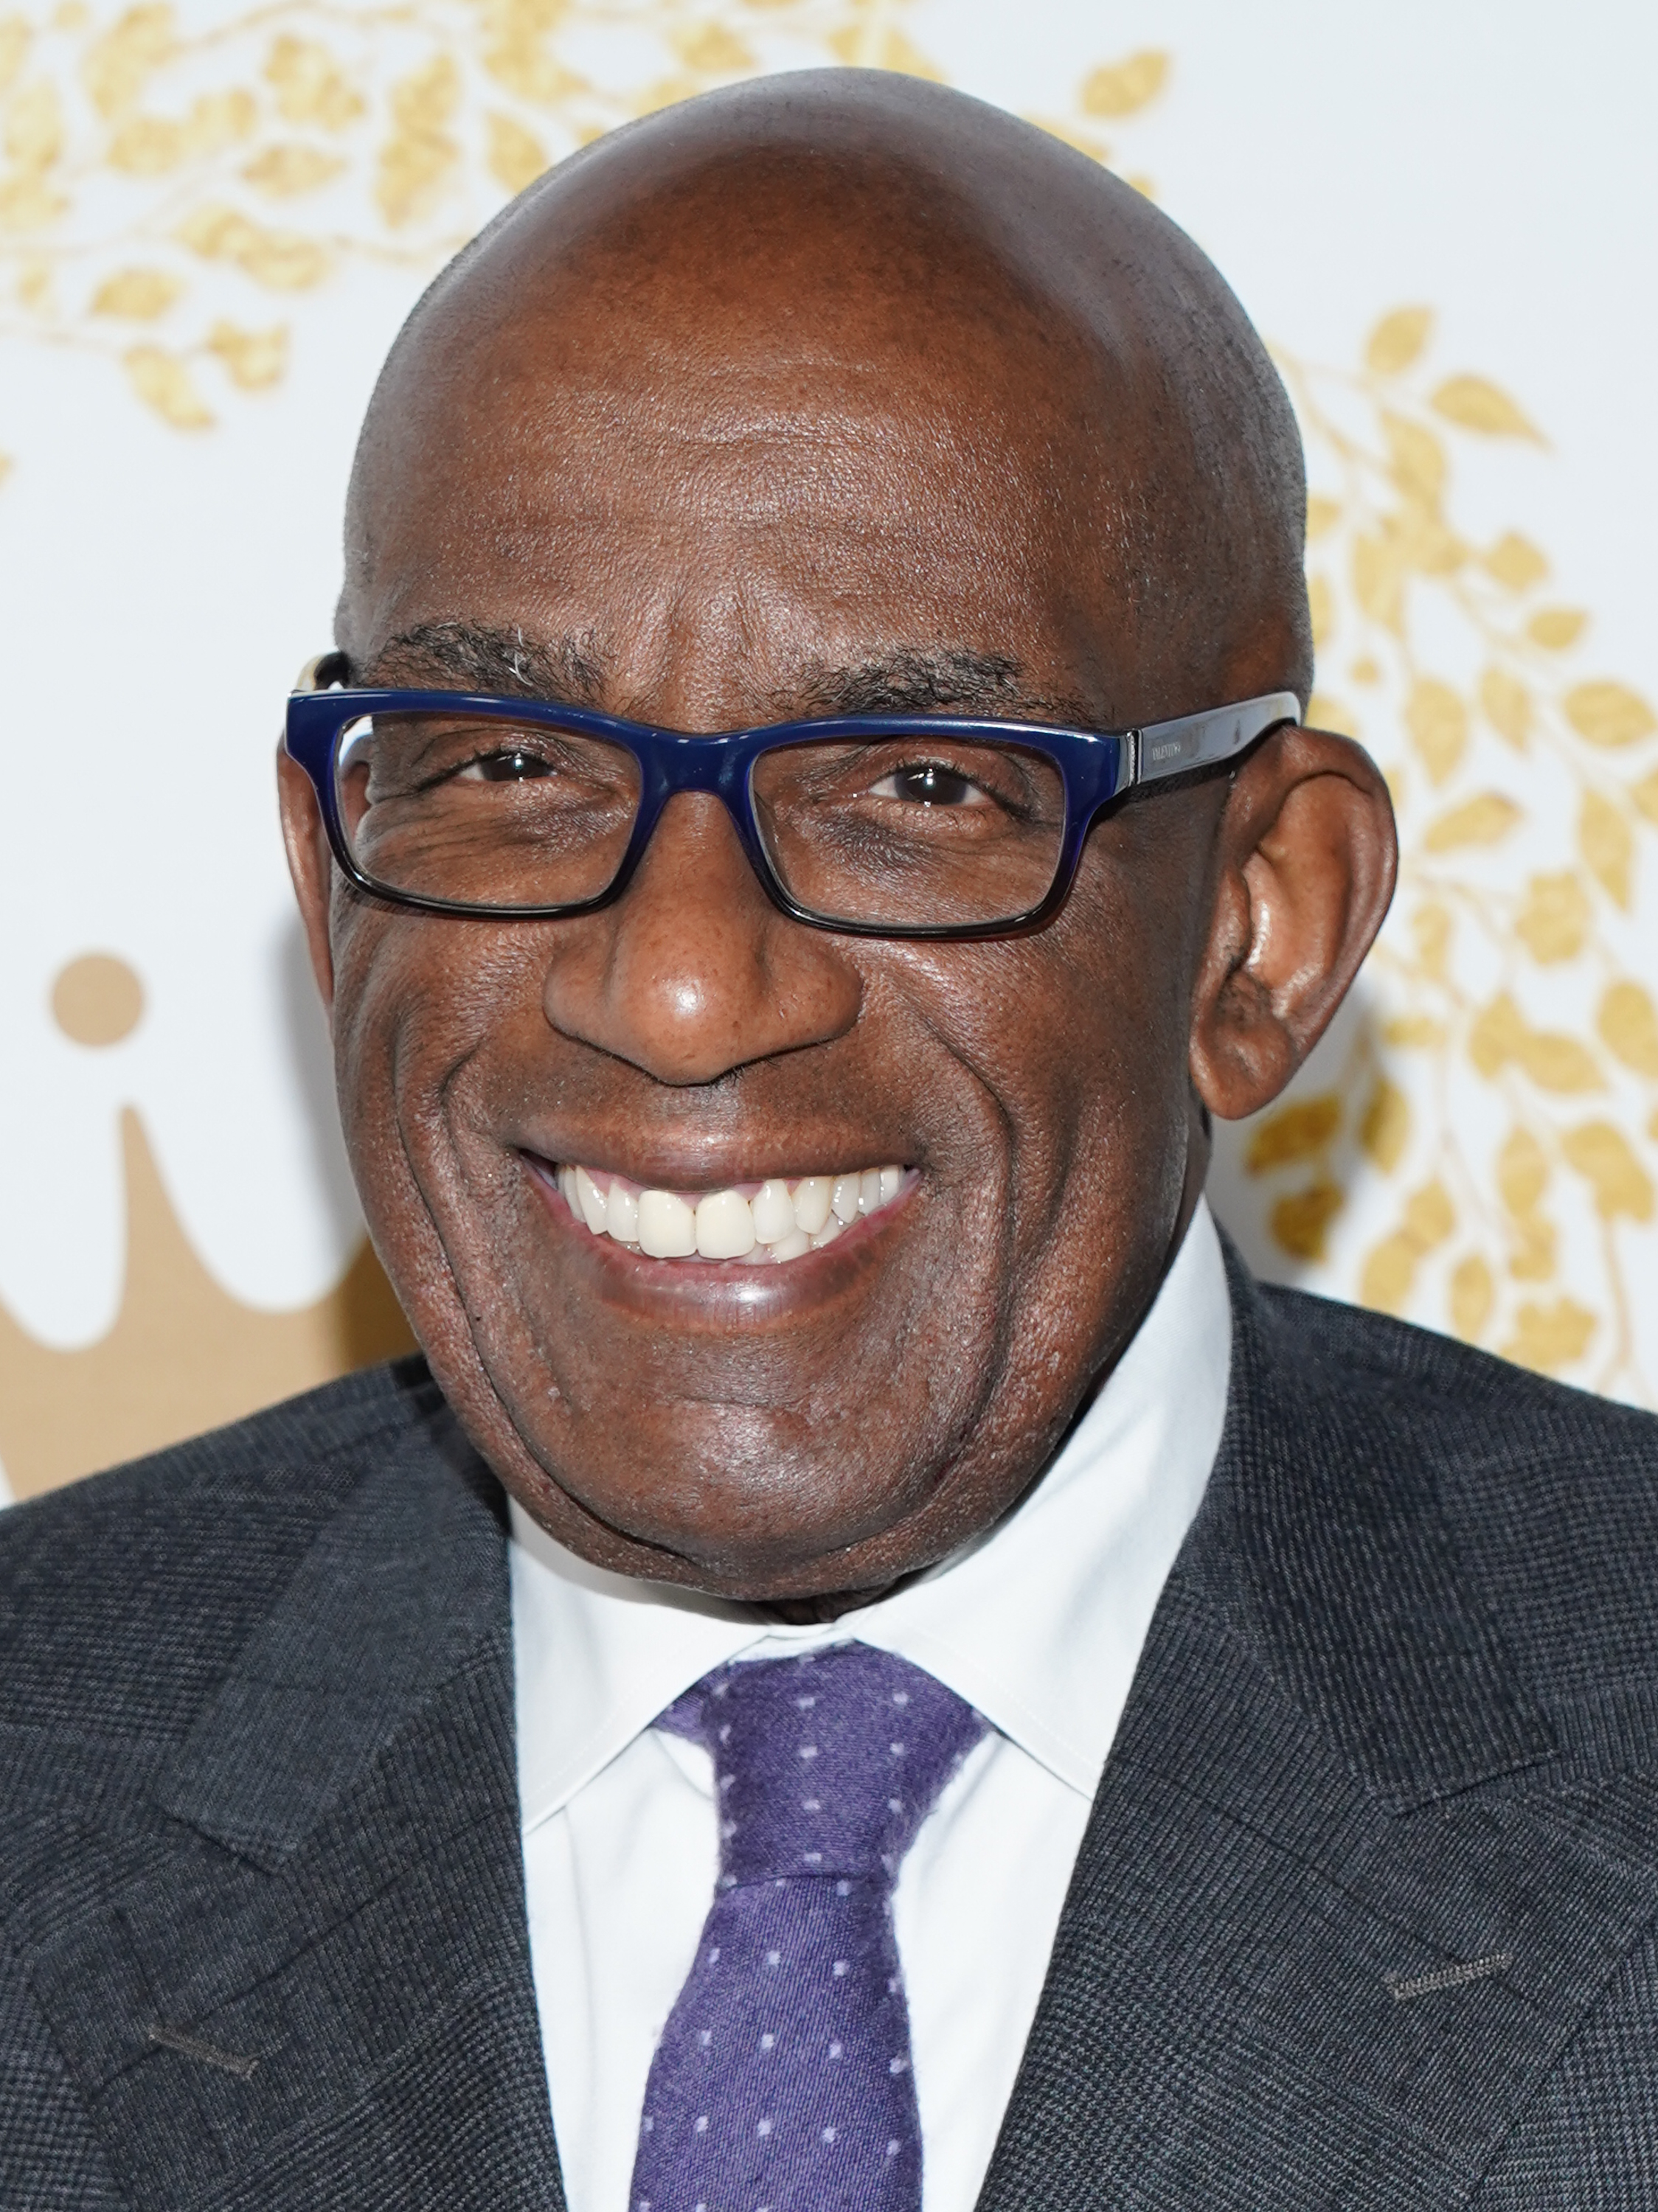 Al Roker at the Winter TCA Tour in Pasadena, California on February 9, 2019 | Source: Getty Images